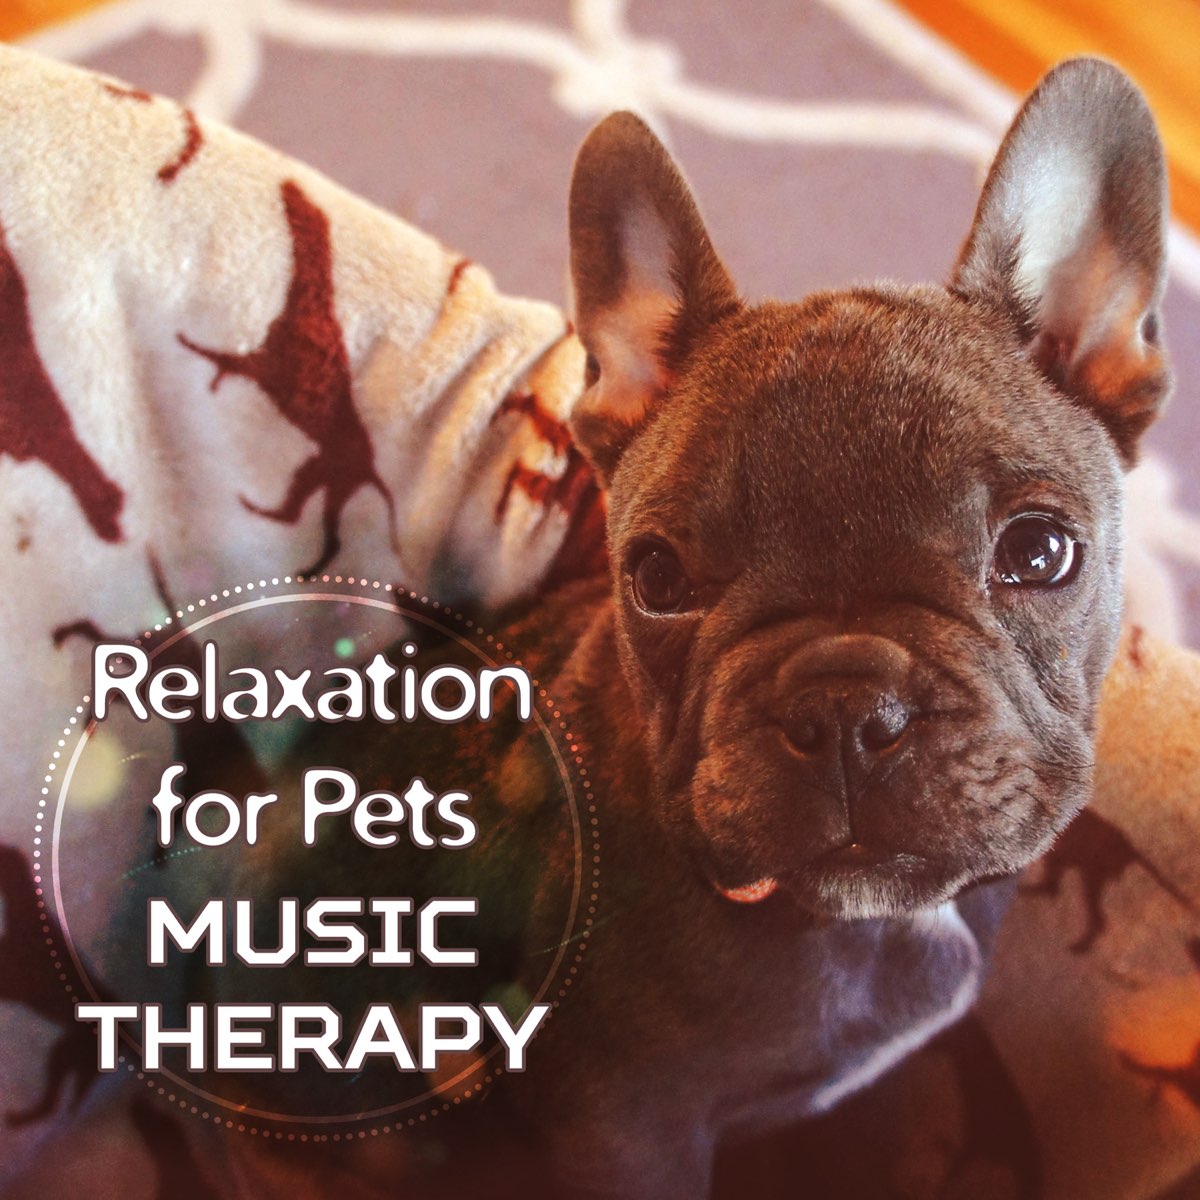 Music Therapy for Cats. Музыка для Petpet. Pets музыка